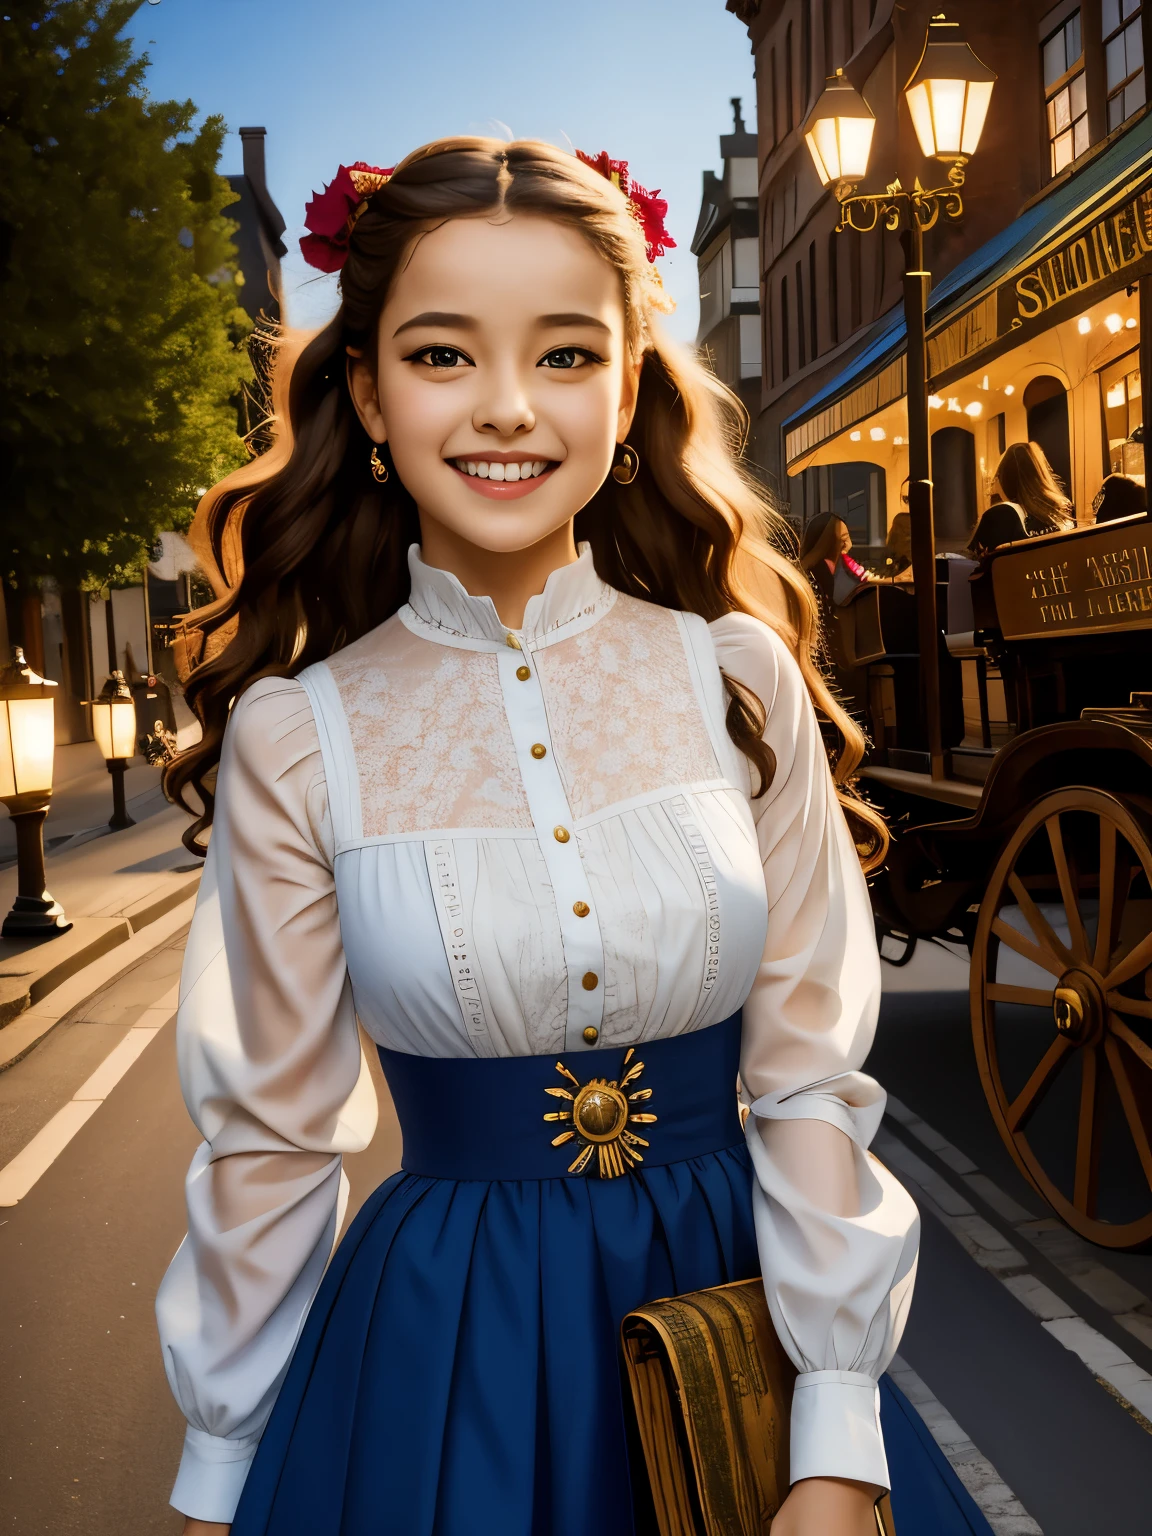 (masterpiece), best quality, expressive eyes, perfect face,a girl smiles towards the camera in a wonderful sunny day. her smile is cheerful but contained and reserved, Victorian era posing in front of a period building, night, street lights, people along the road, horse-drawn carriages, romantic atmosphere, sky with various nocturnal colors and stars.​